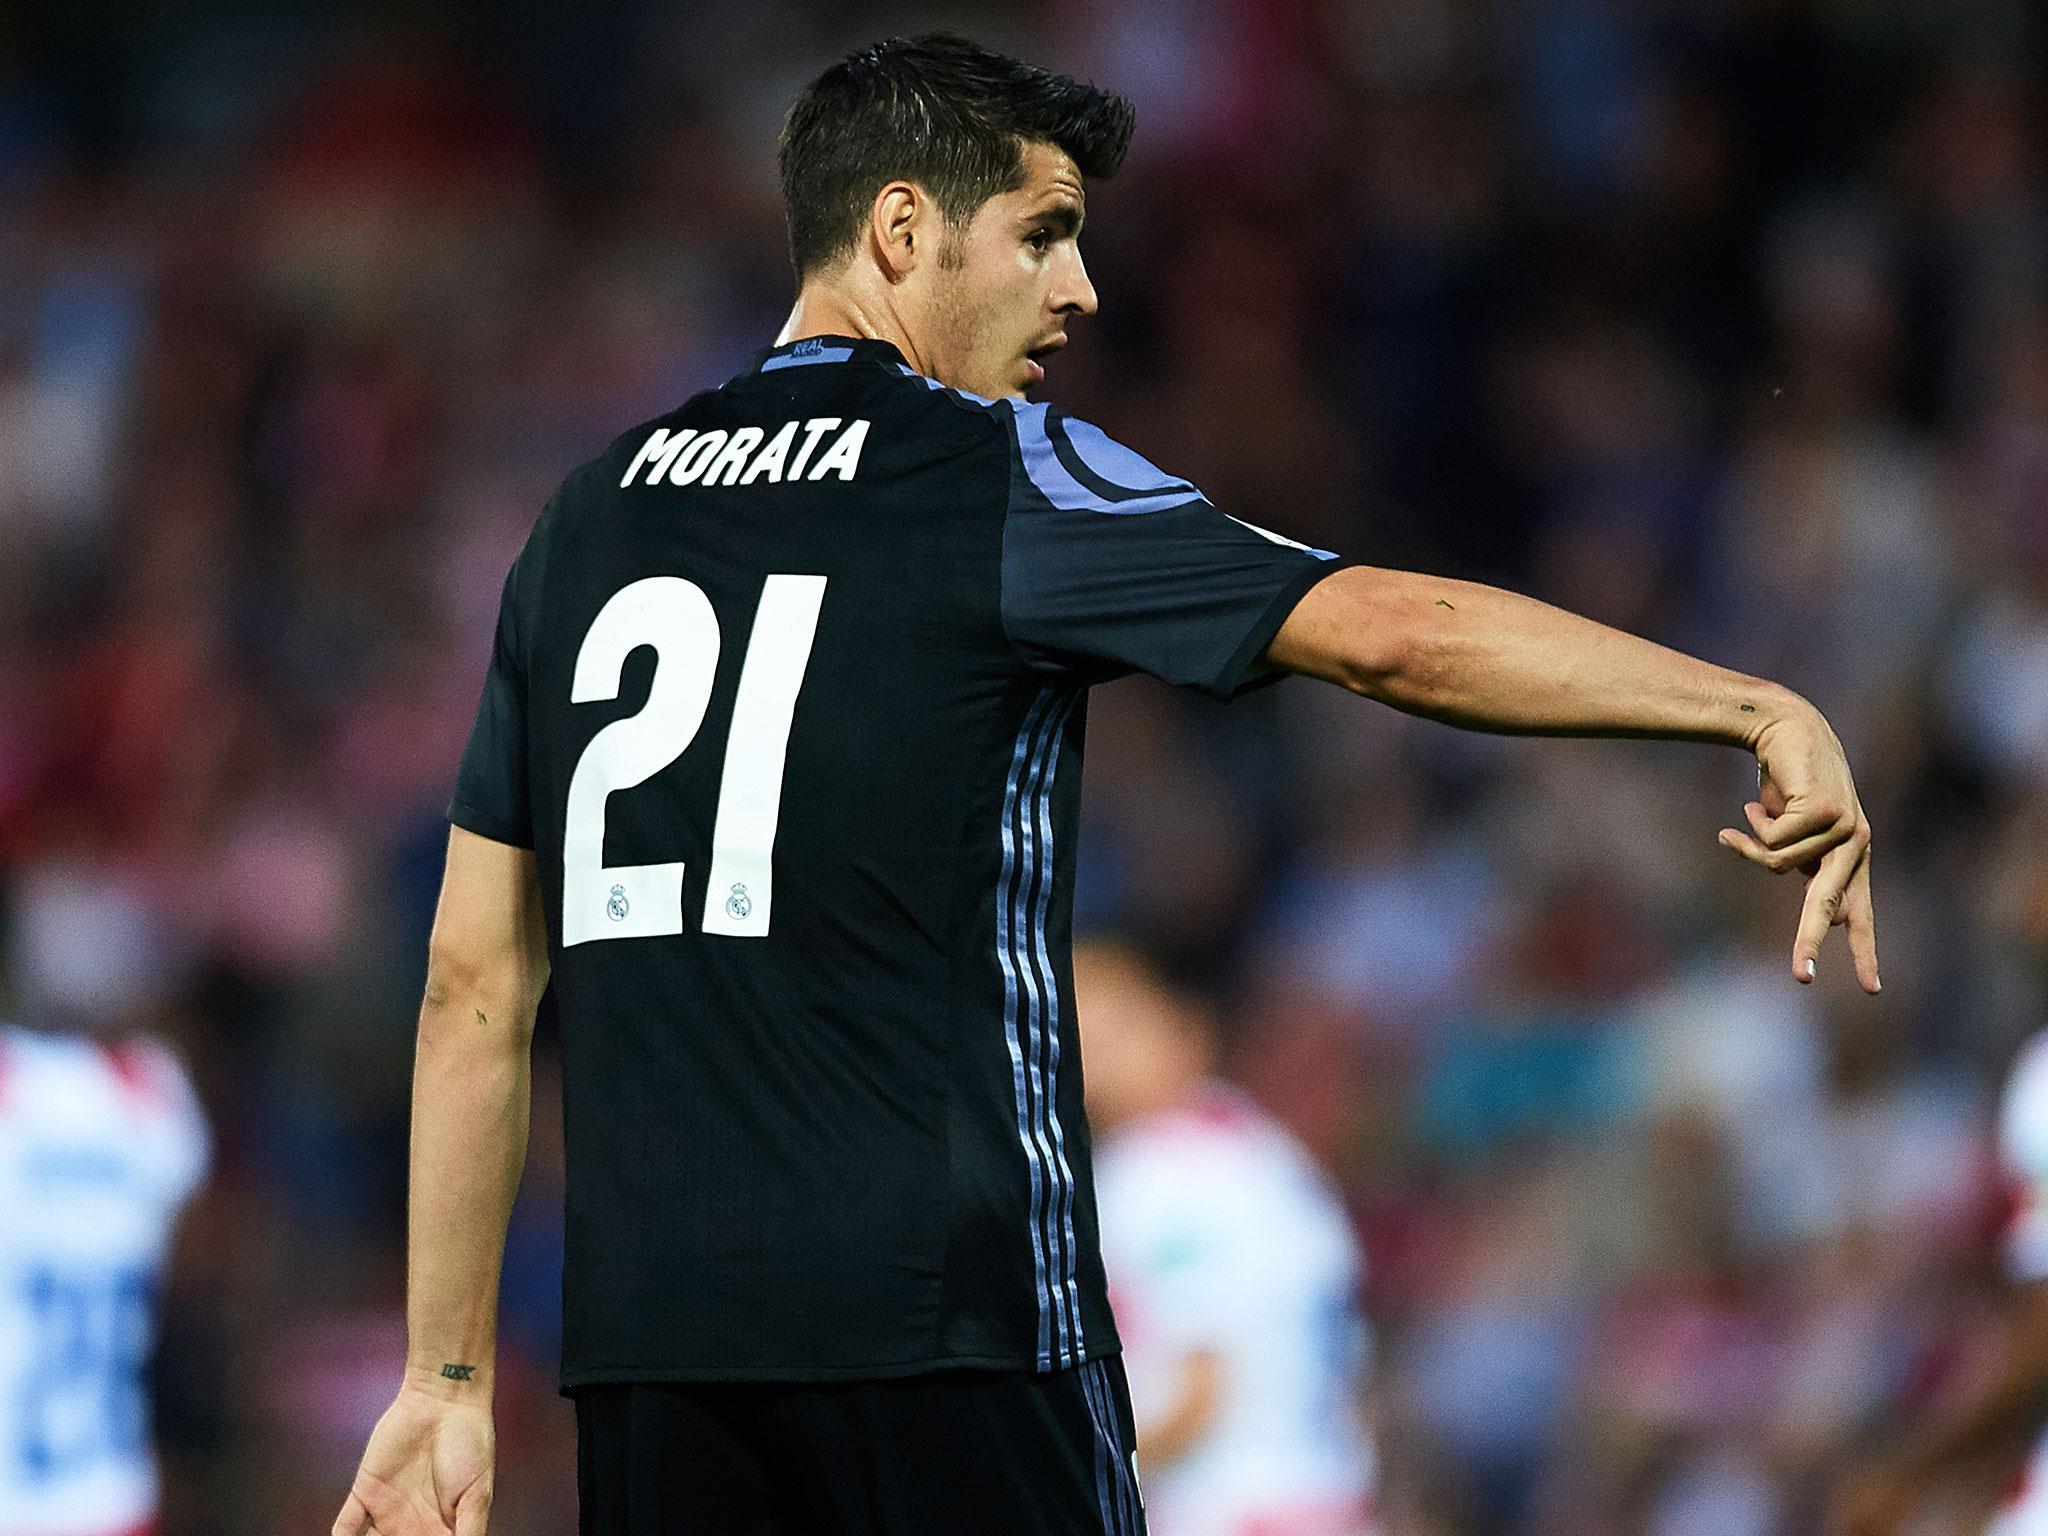 Morata looks set to join United this summer